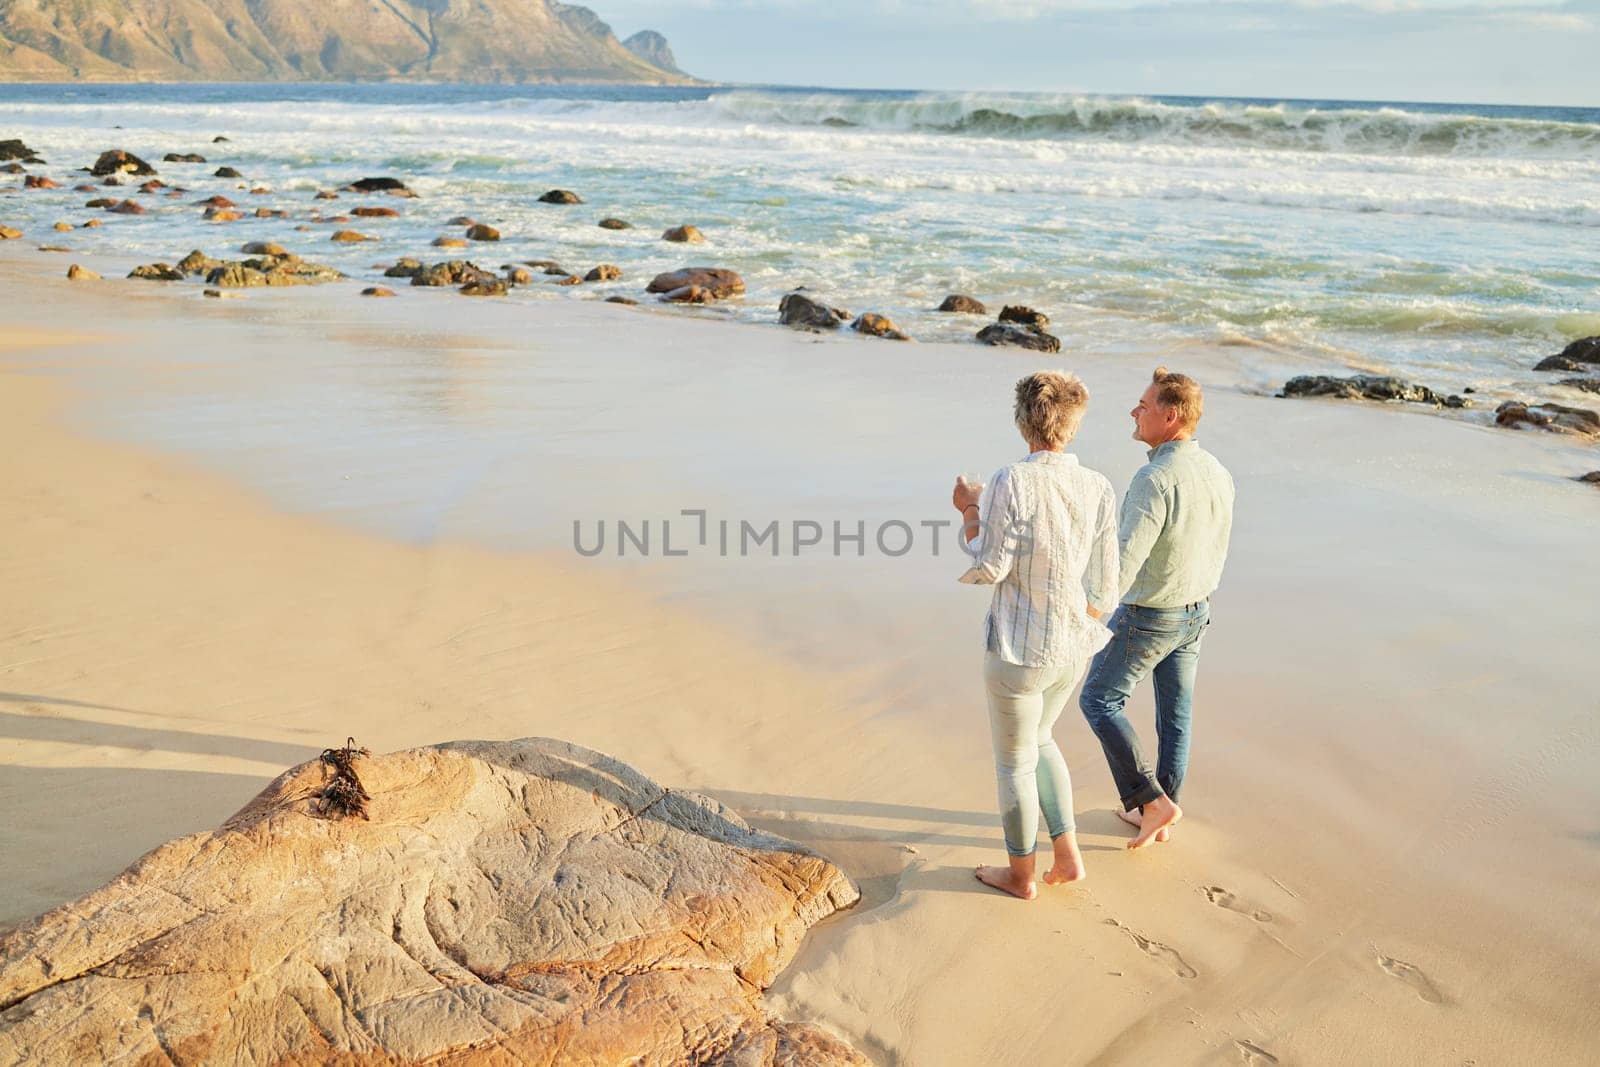 Beach, love and a senior couple walking on the sand by the ocean or sea for romance or dating at sunset. Nature, summer or back with a mature woman and man taking romantic walk together on the coast.